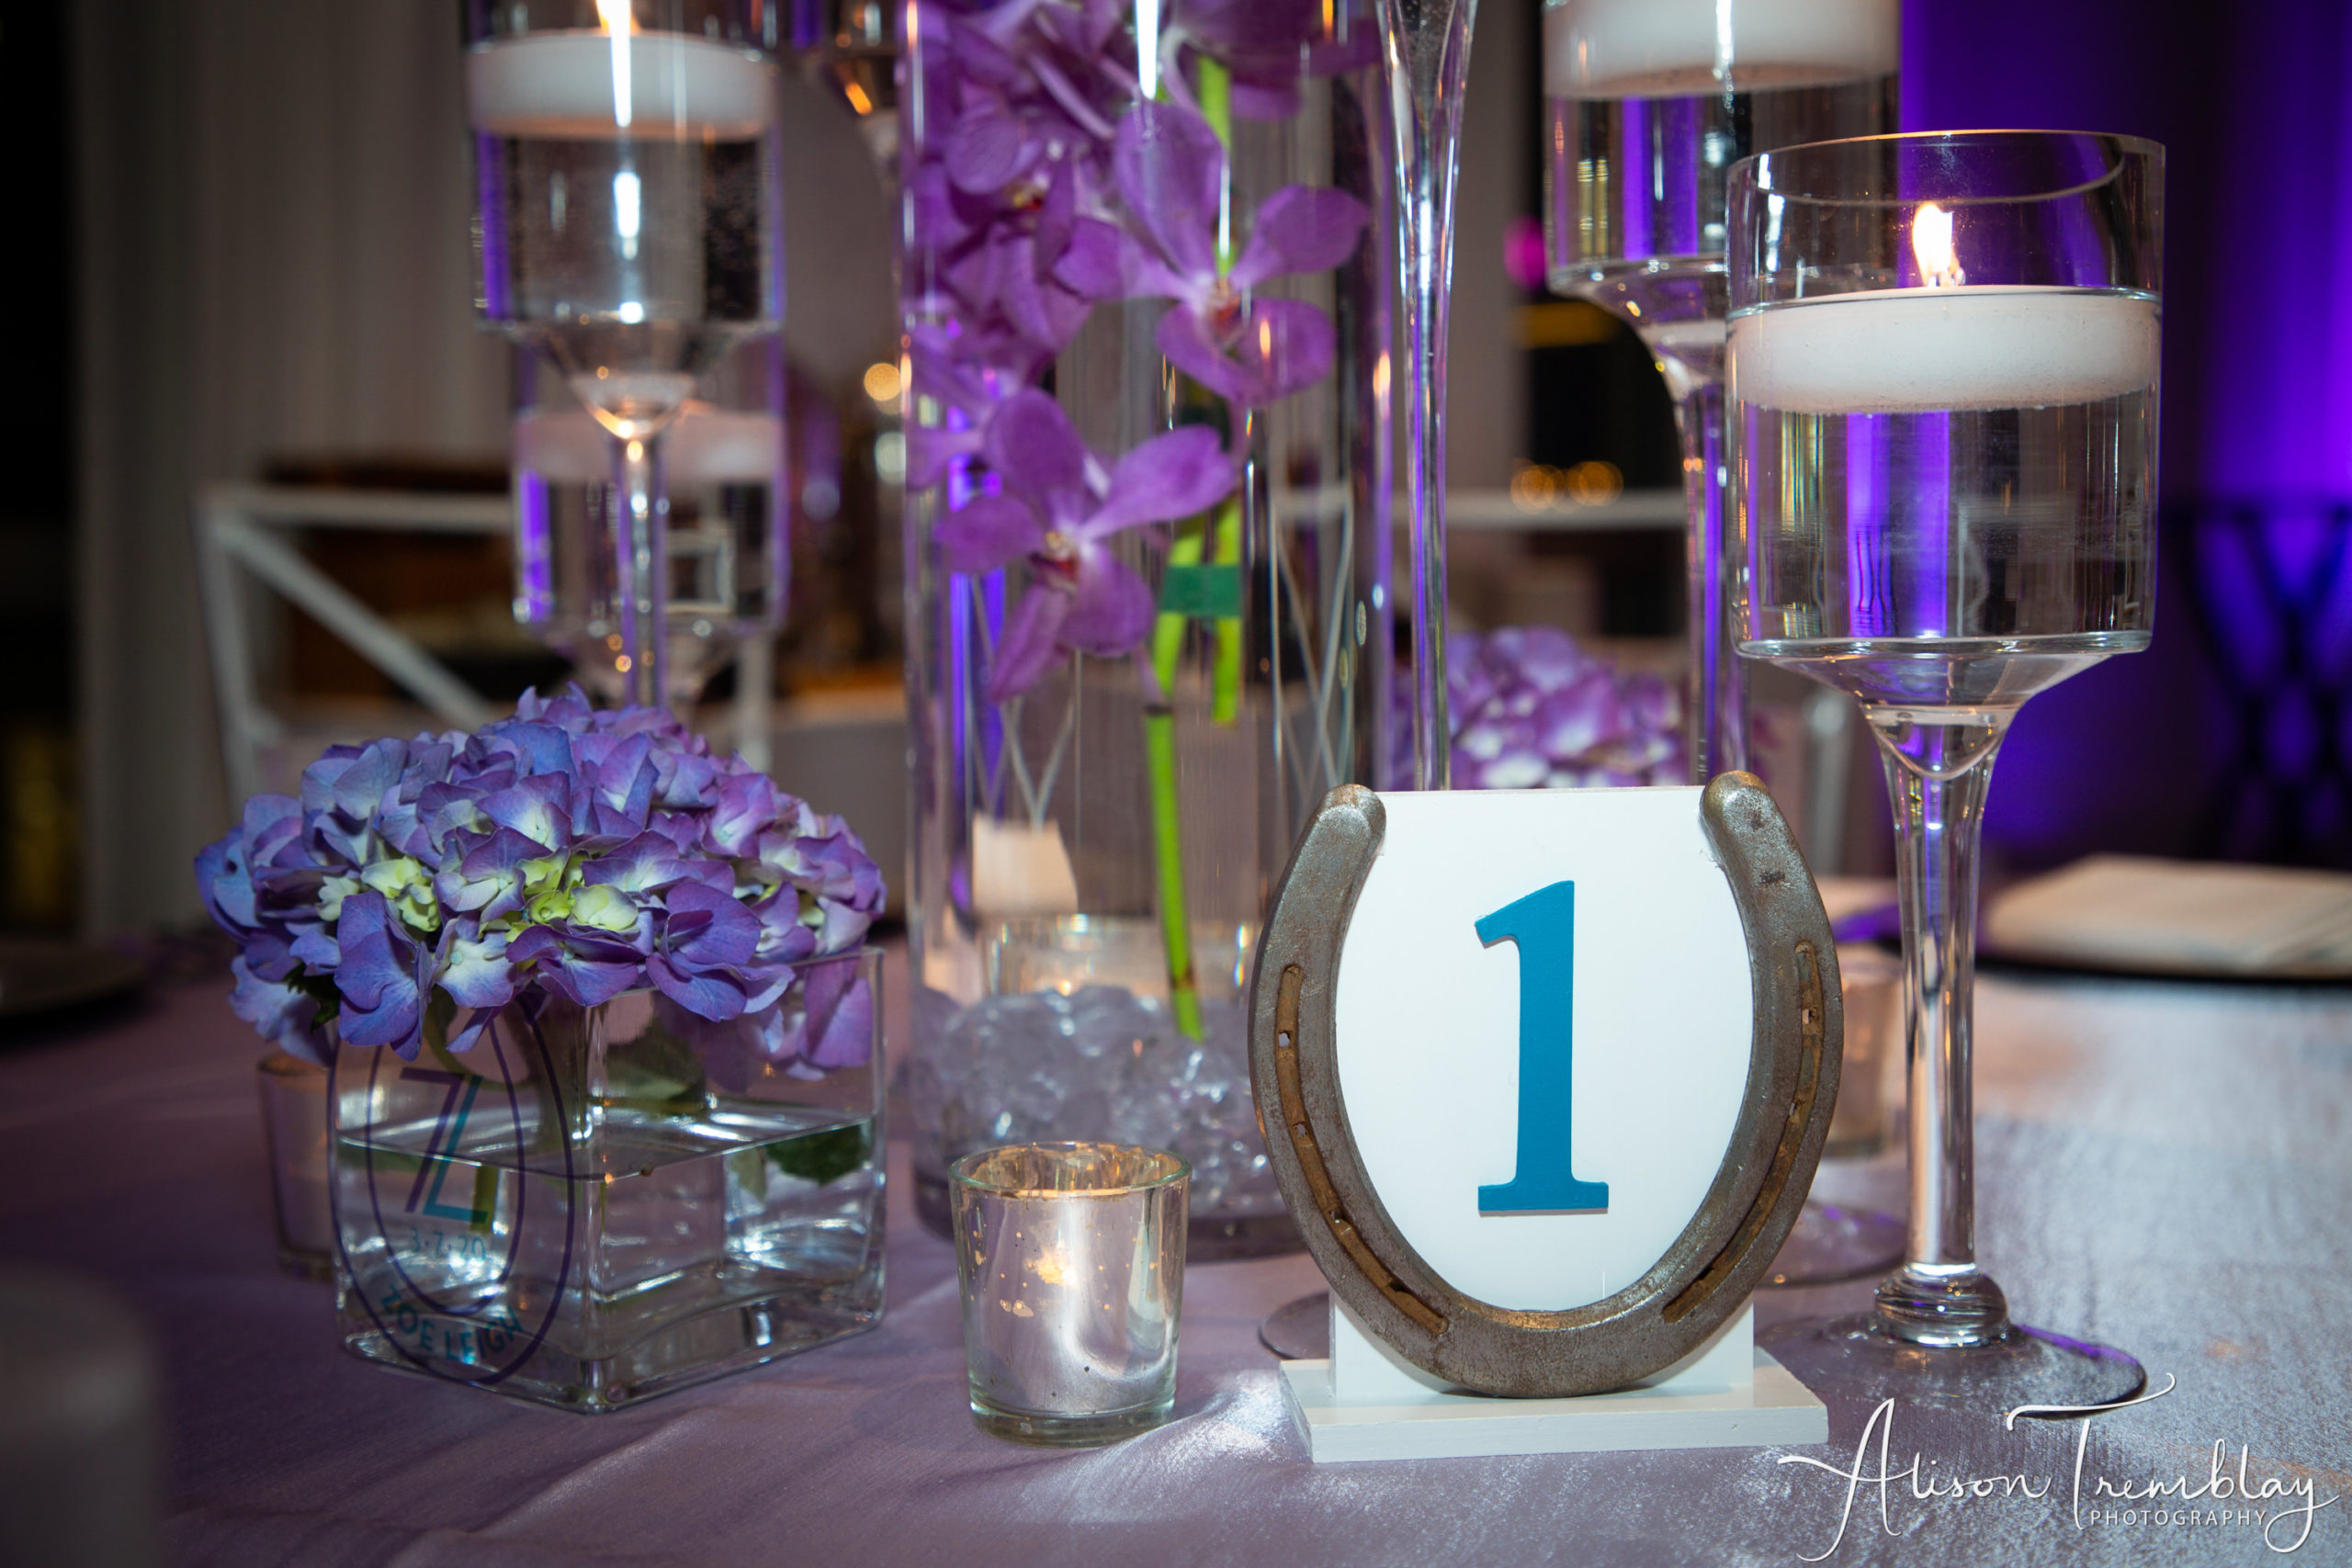 Floral centerpieces and horse shoe table numbers at Zoe's Purple and Teal Equestrian Bat Mitzvah at Canopy by Hilton Washington DC Bethesda North | Pop Color Events | Adding a Pop of Color to Bar & Bat Mitzvahs in DC, MD & VA | Photo by: Alison Tremblay Photography